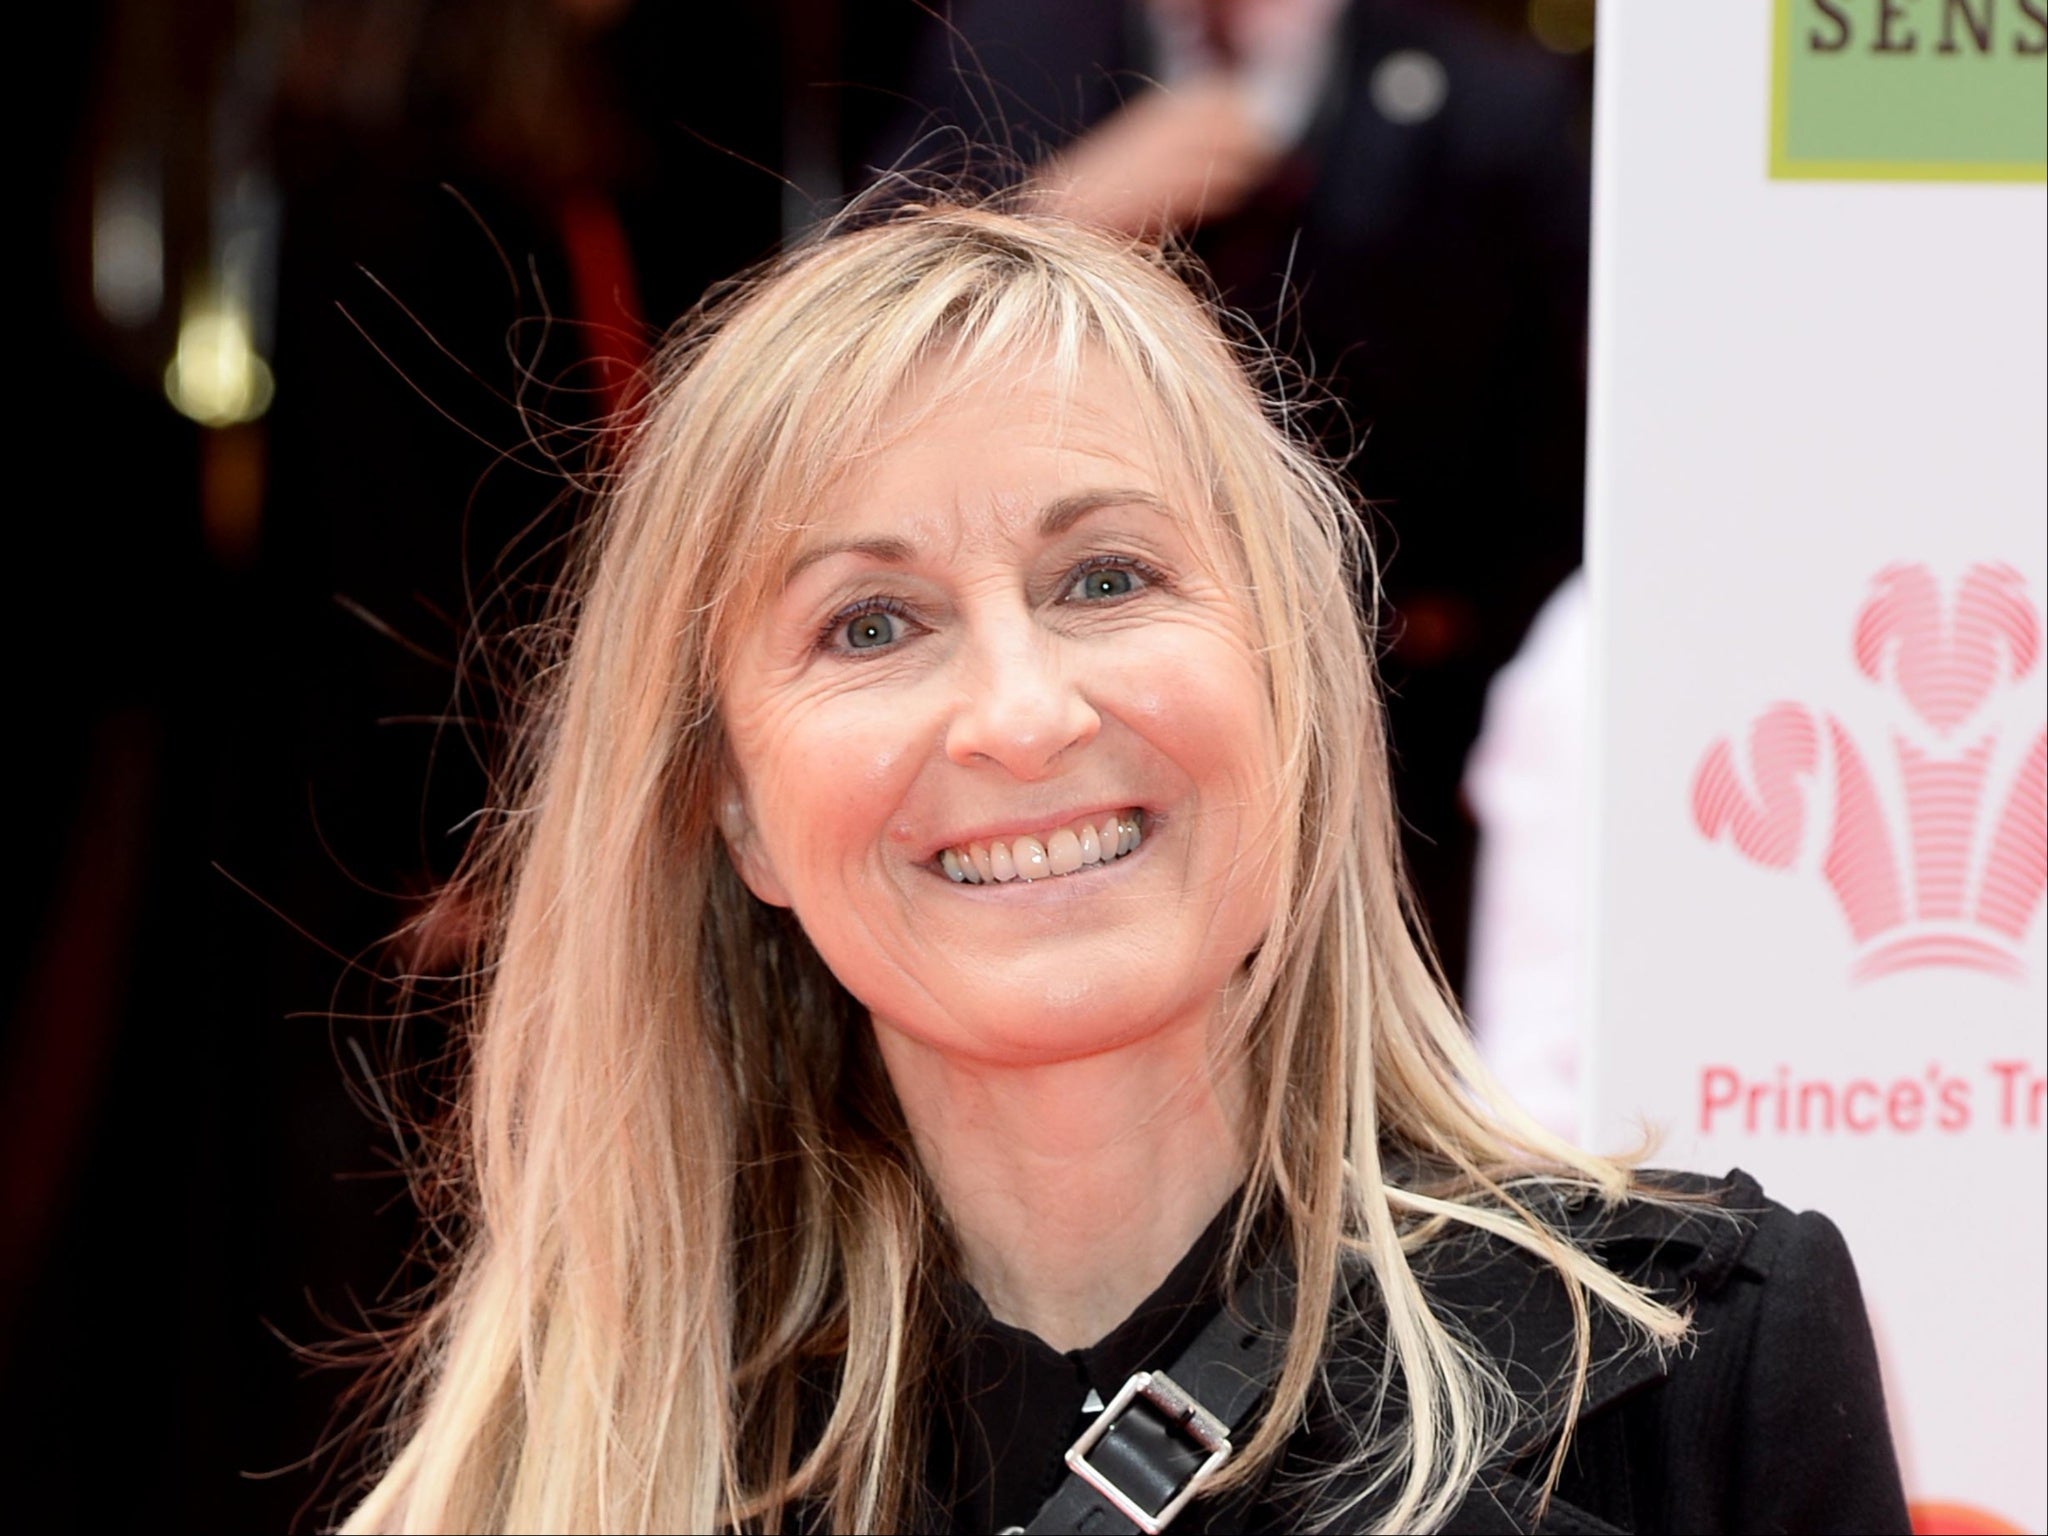 Fiona Phillips initially thought her Alzheimer’s symptoms were related to the menopause